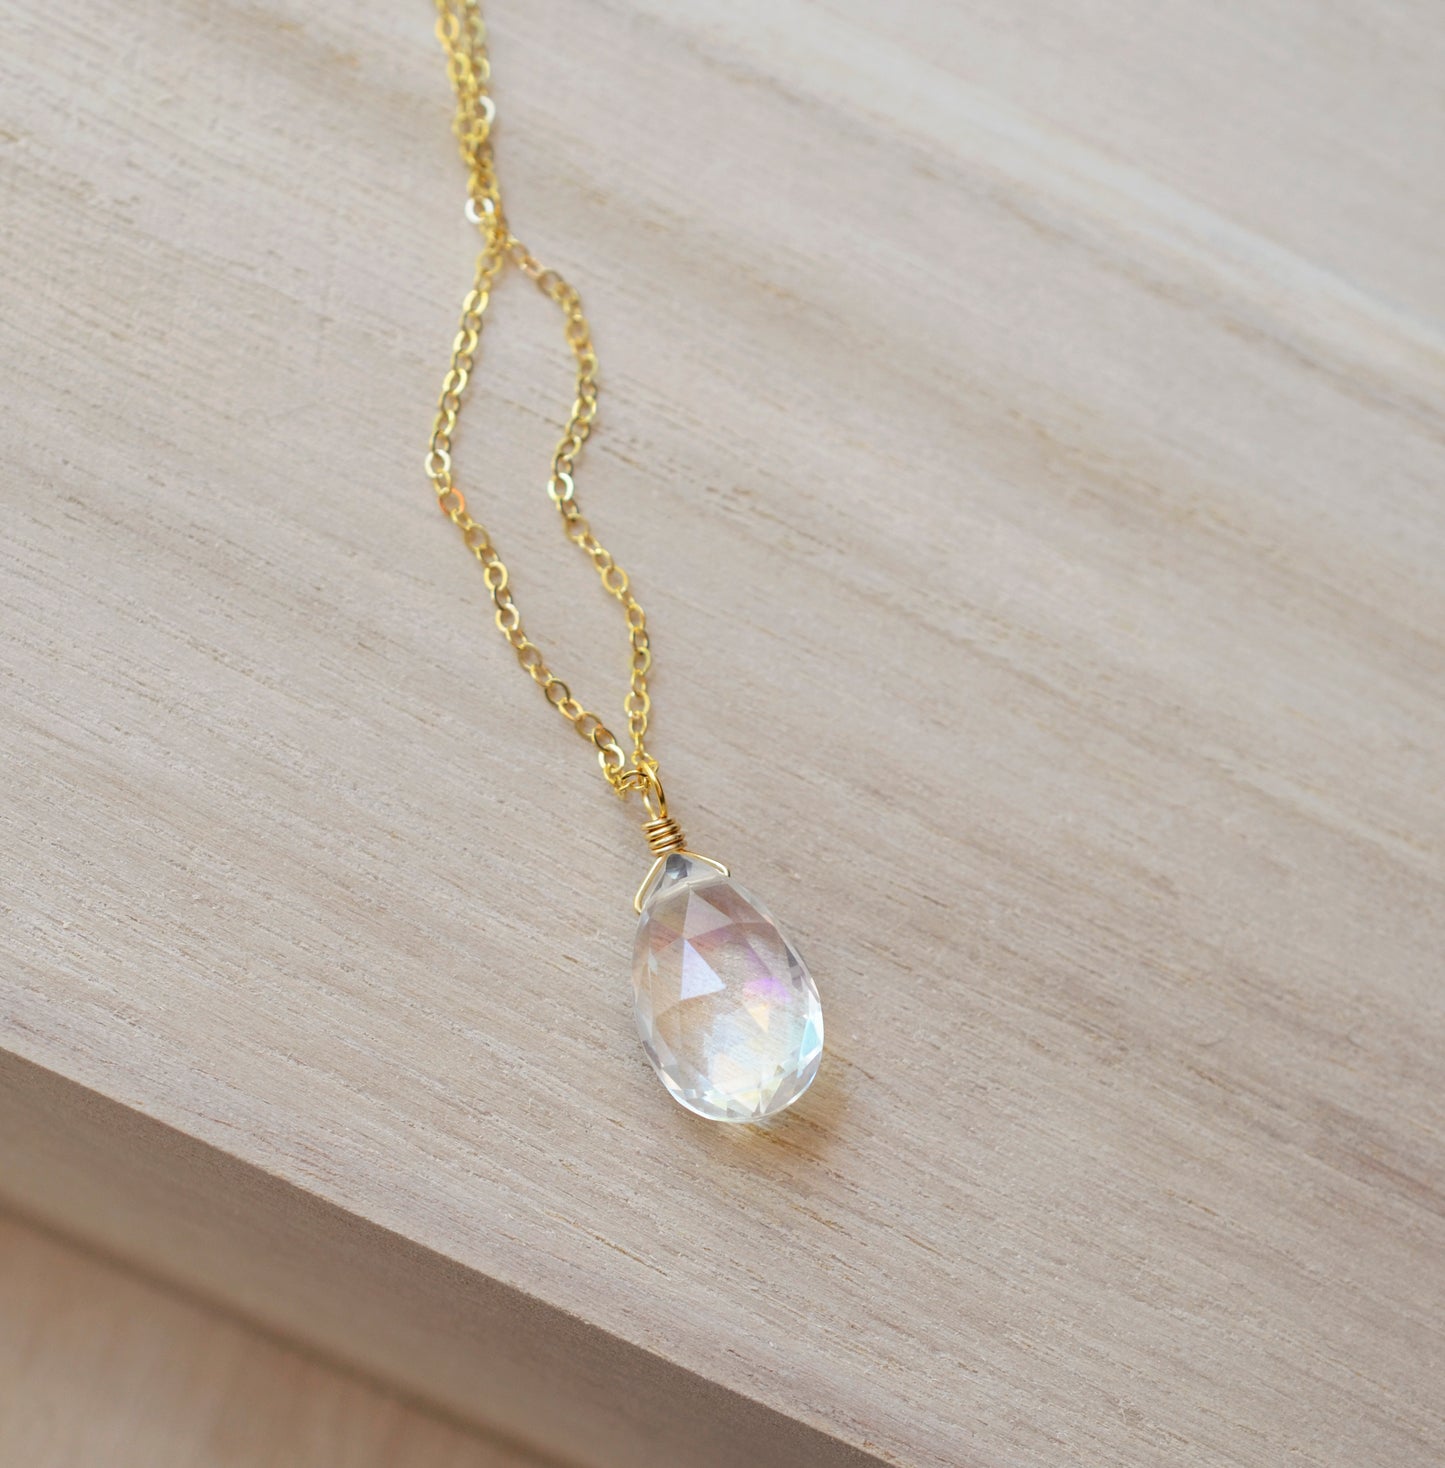 Rainbow hues shown within the Mystic Topaz. The gemstone is a faceted teardrop shape. The 14k gold filled style is shown.